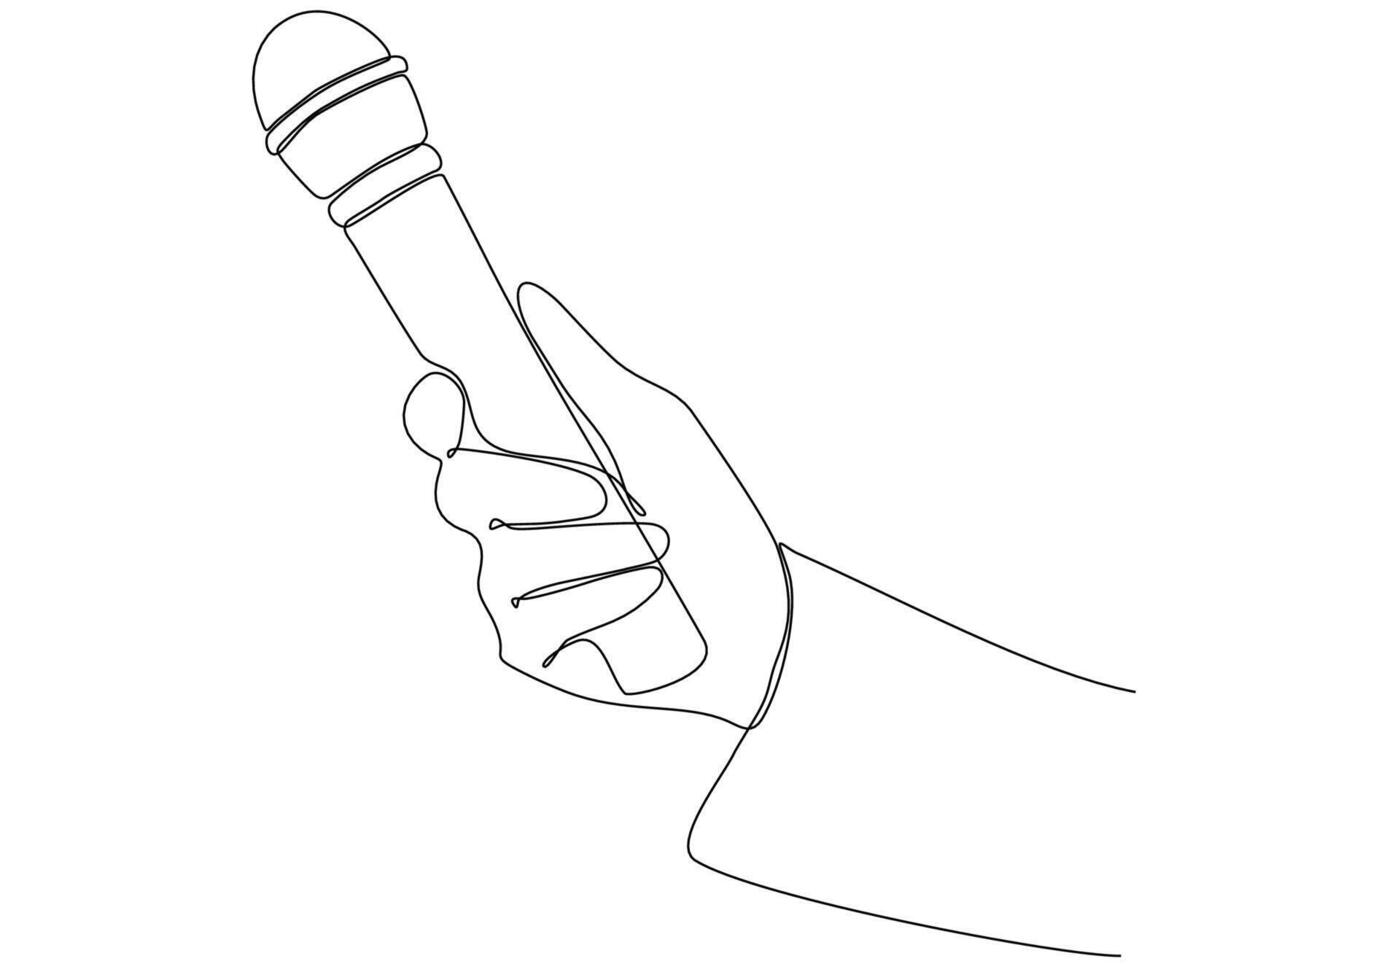 Continuous line image holding microphone, journalist symbol vector illustration